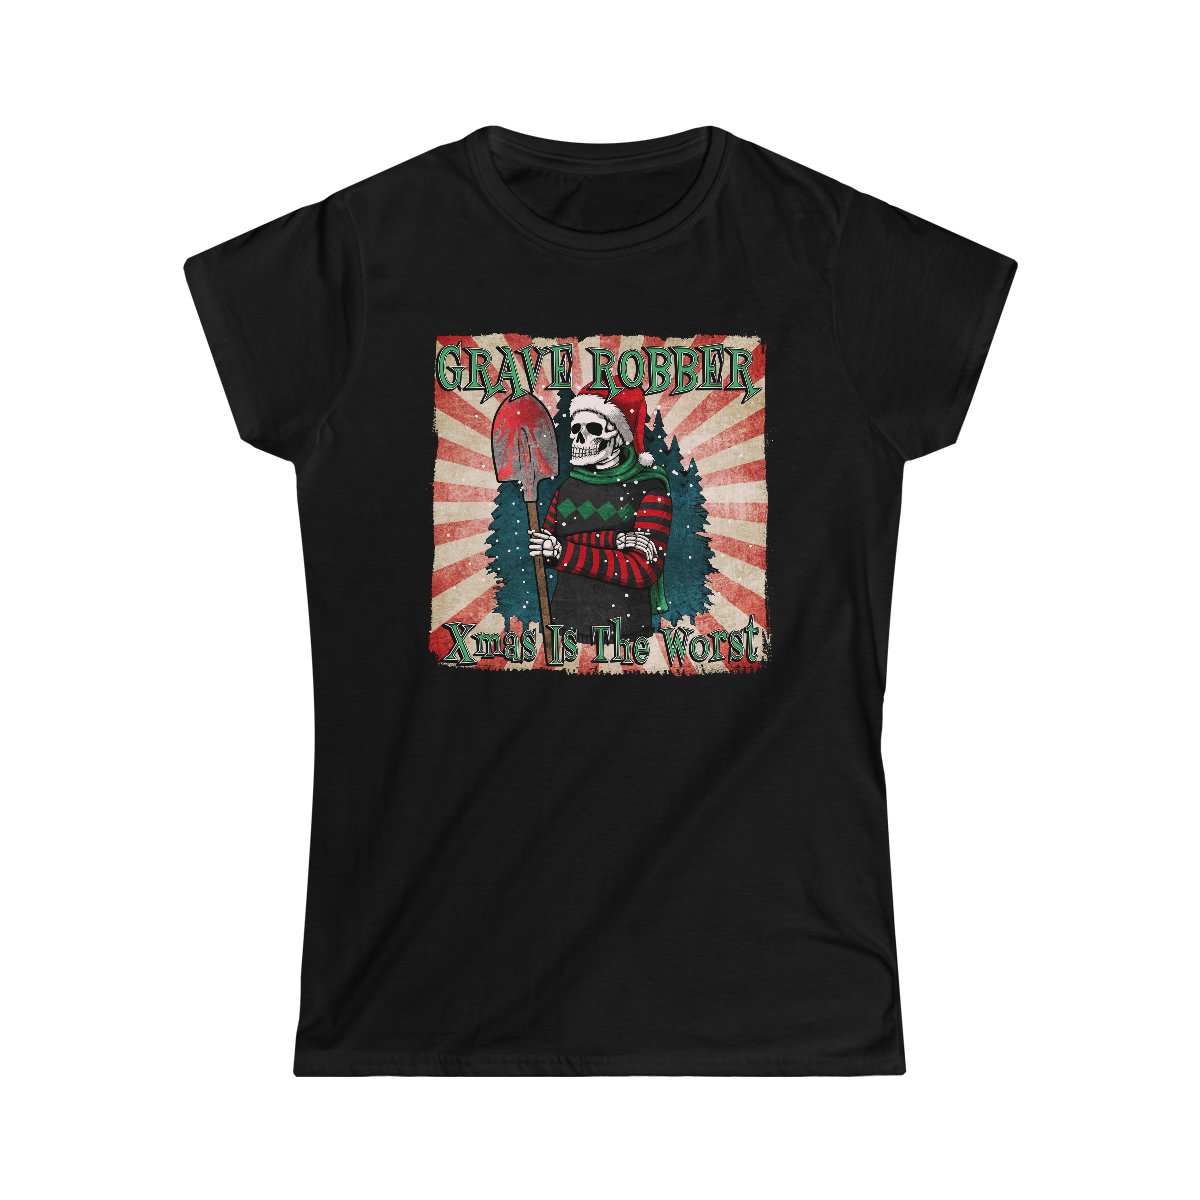 Grave Robber – Xmas Is The Worst Women’s Short Sleeve Tshirt